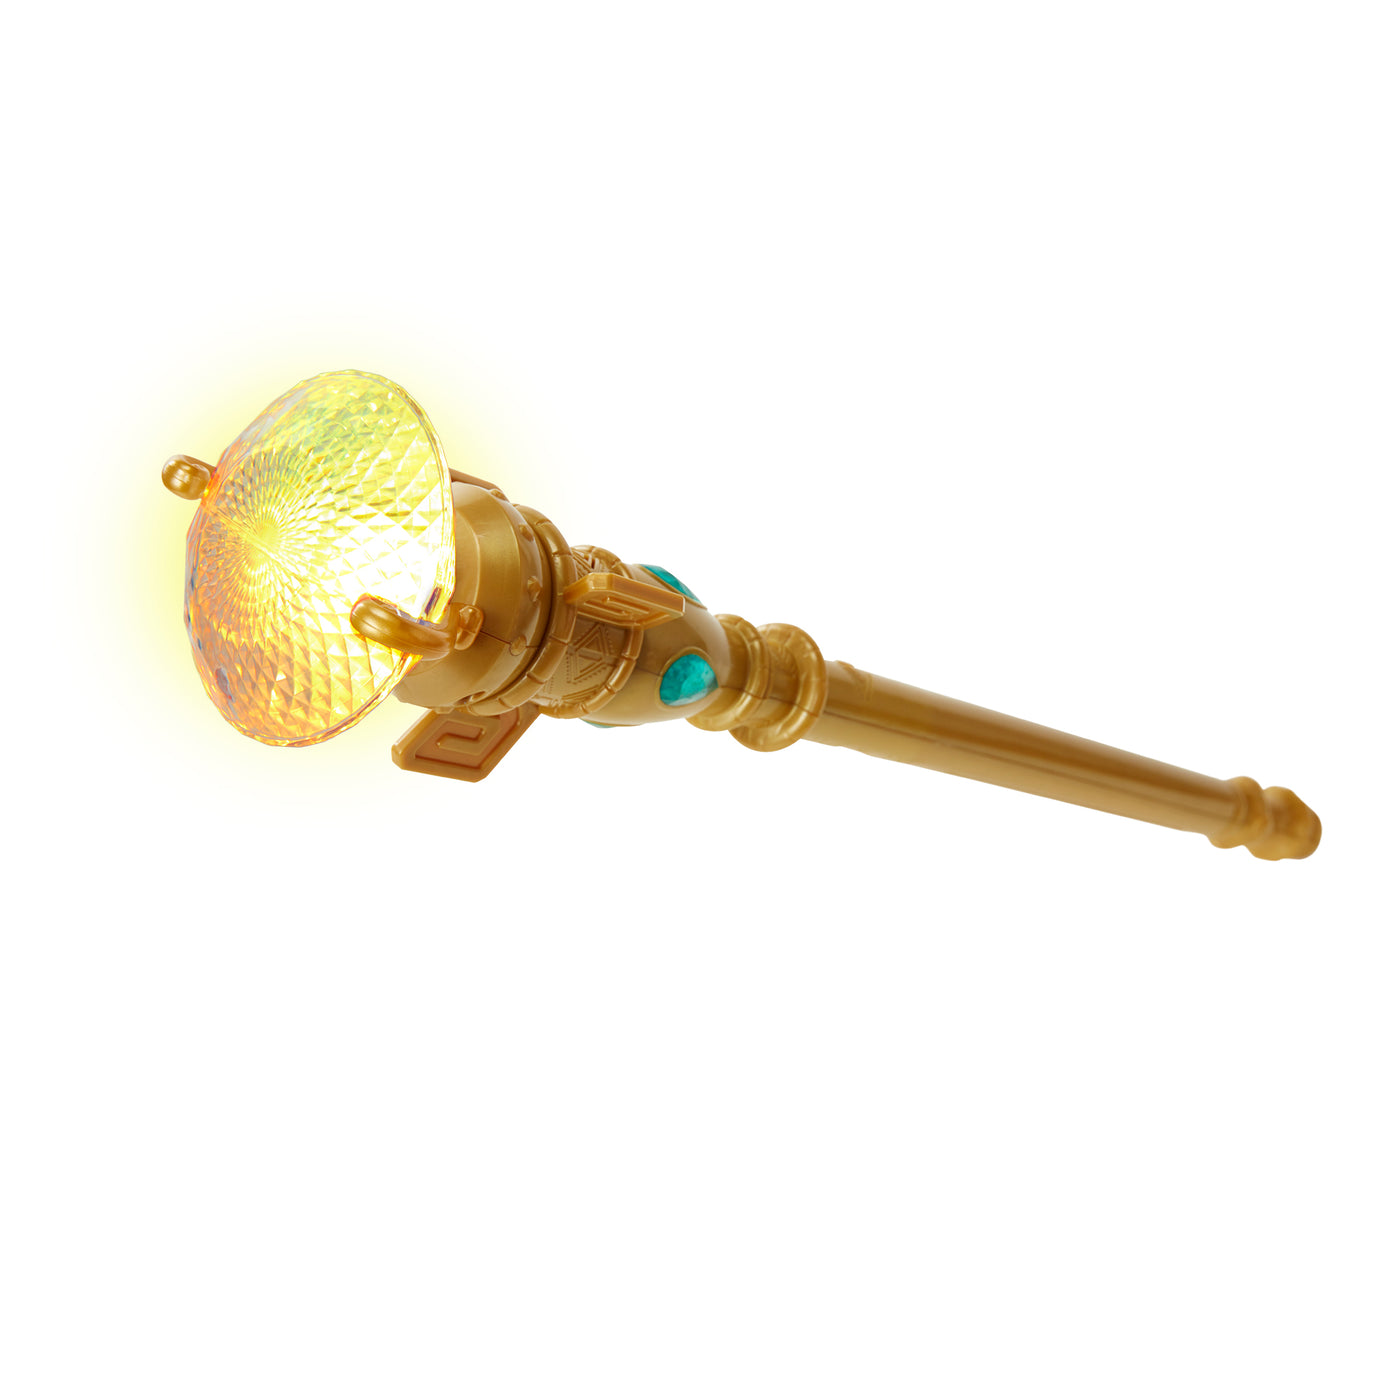 Disney Elena of Avalor Magical Scepter of Light with Sounds